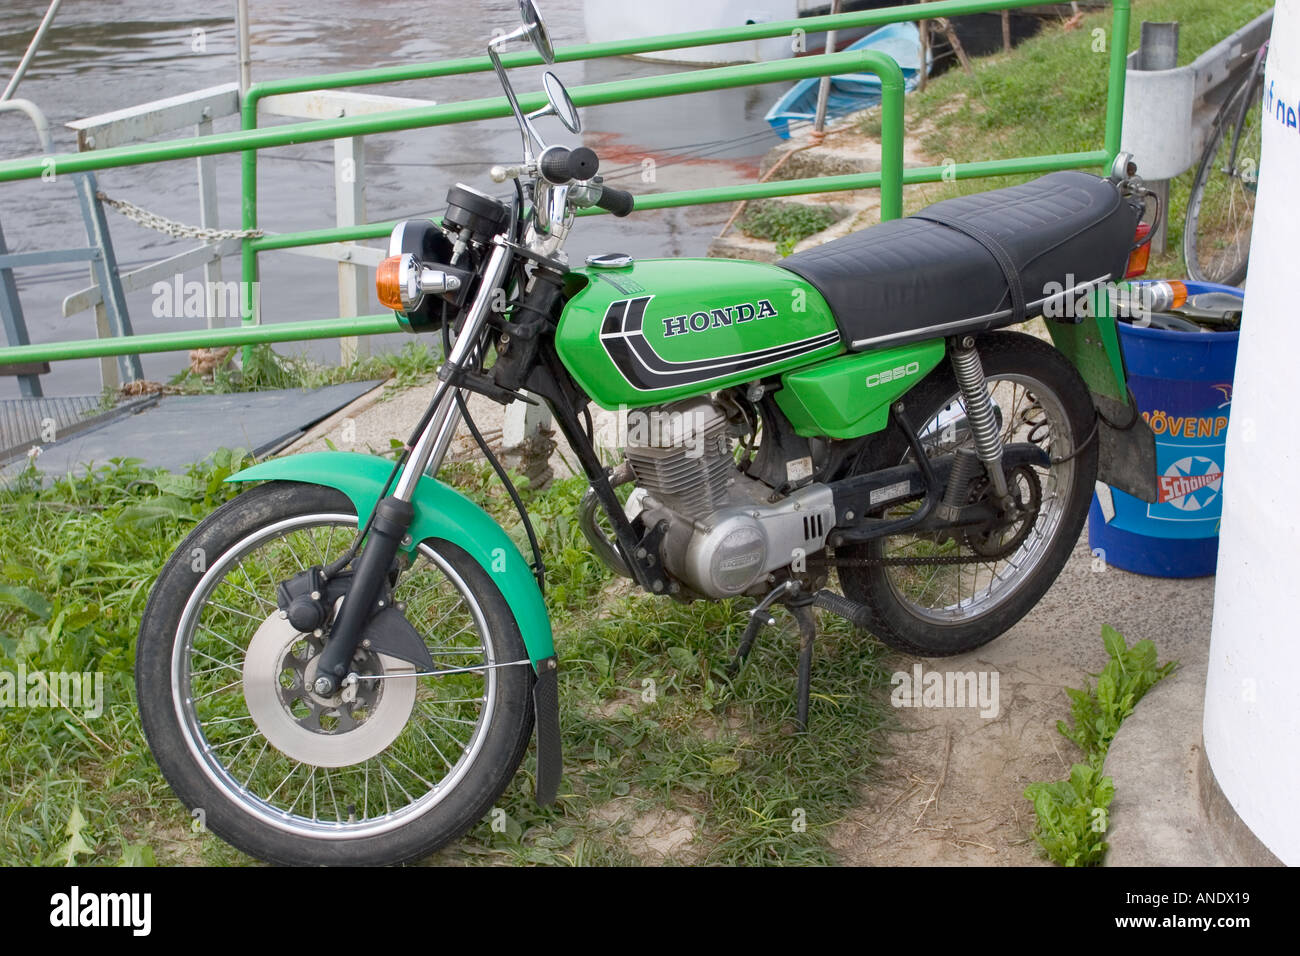 Honda motorcycle by the river in the ancient city of Regensburg on the  Danube River Germany Western Europe Stock Photo - Alamy